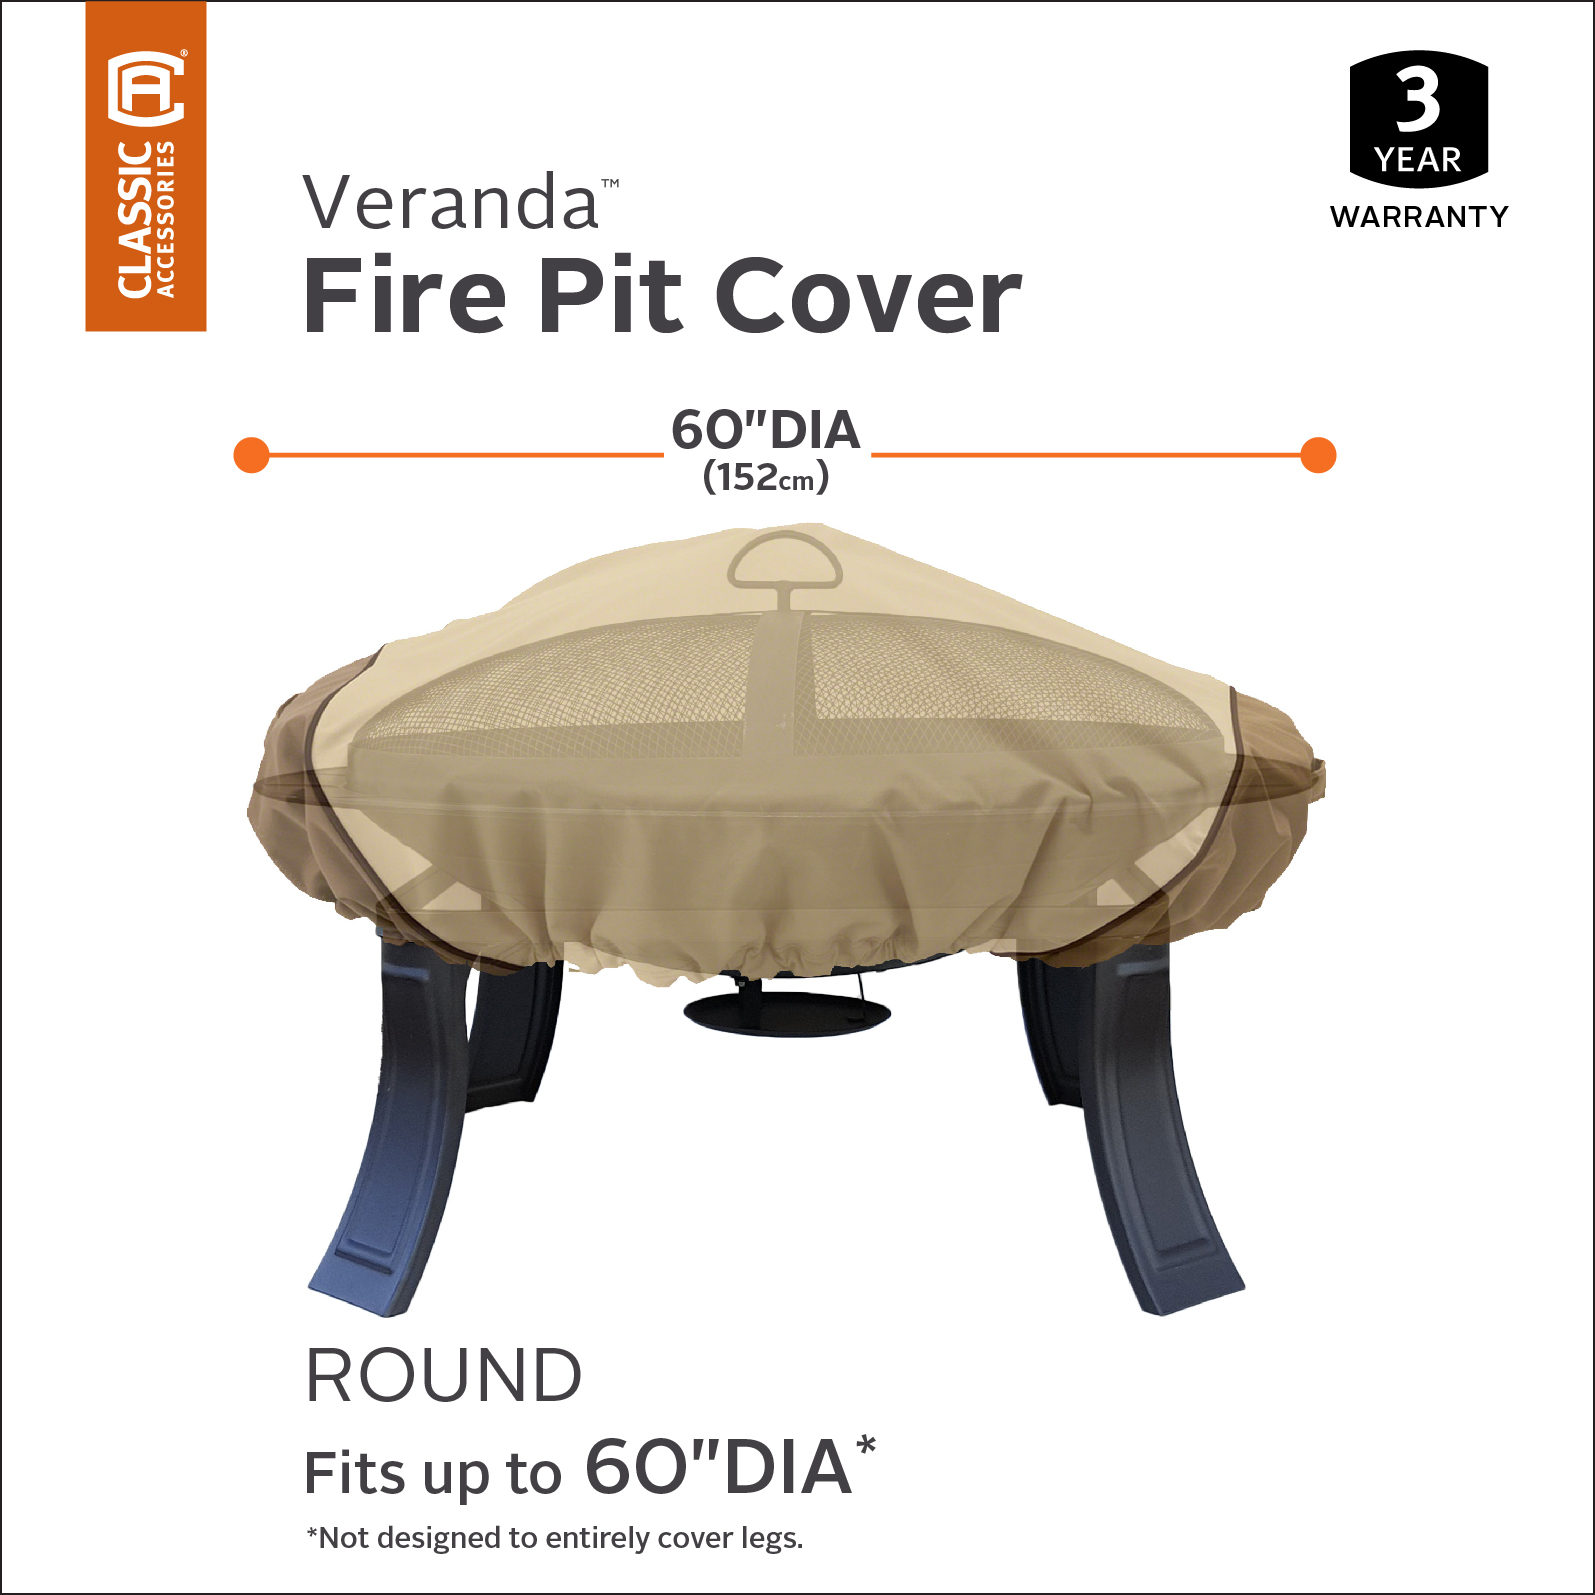 Classic Accessories Veranda™ Round Fire Pit Cover, Large - image 4 of 17